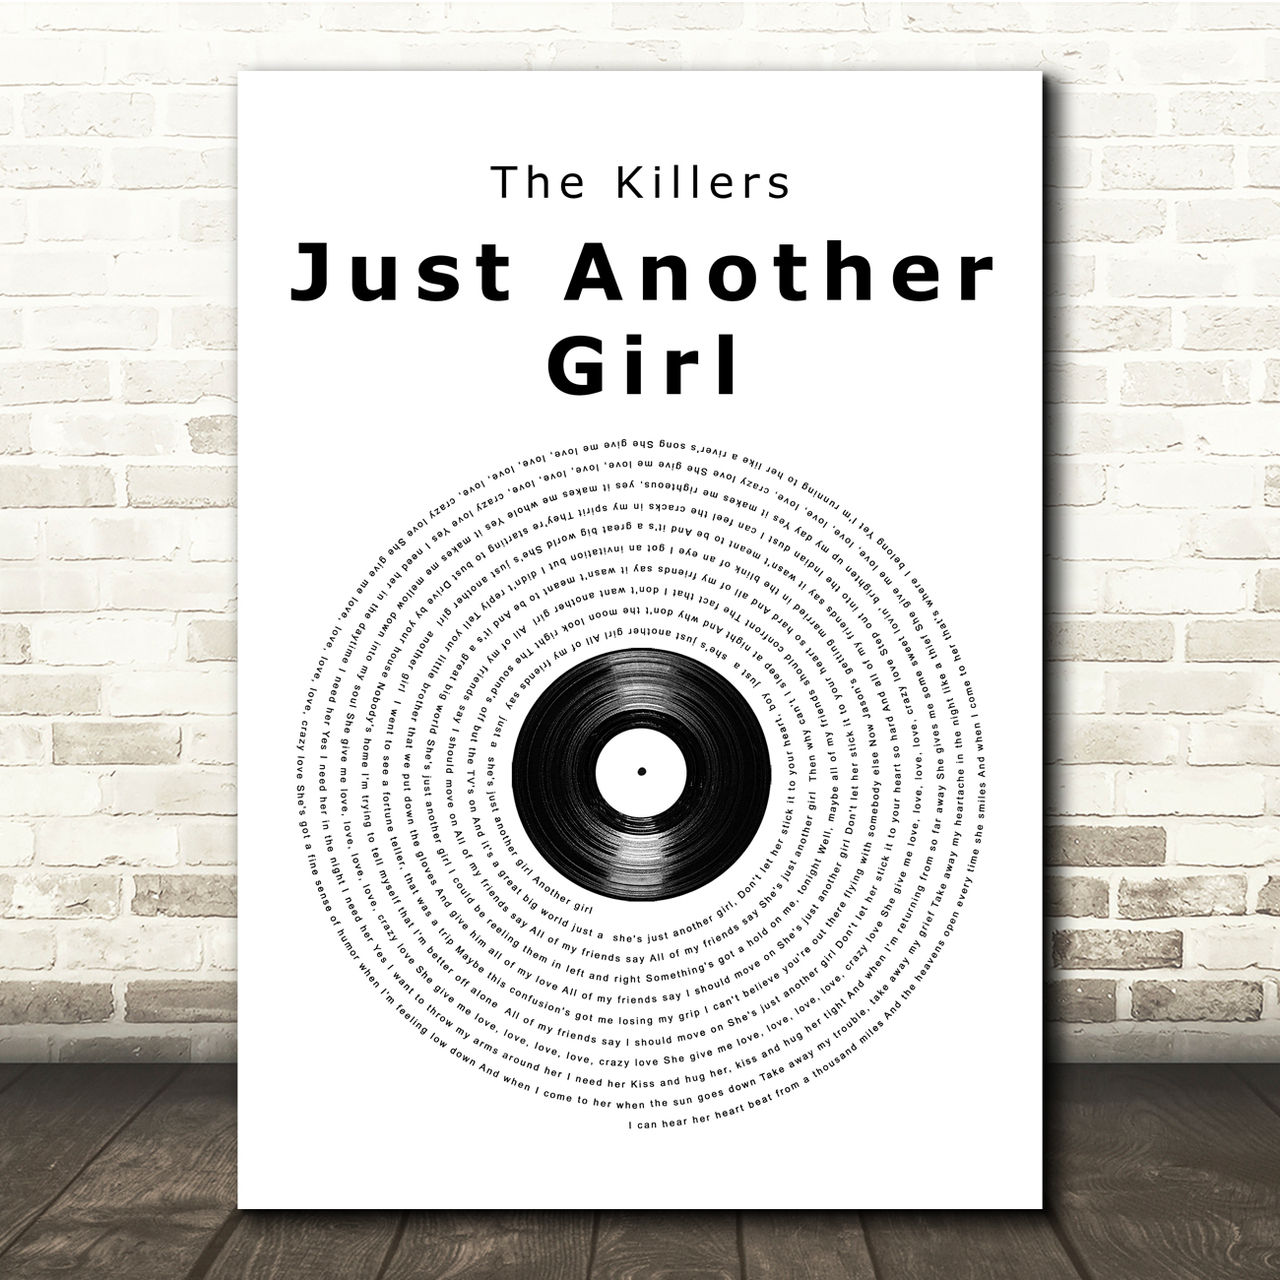 The Killers Just Another Girl Vinyl Record Song Lyric Music Print